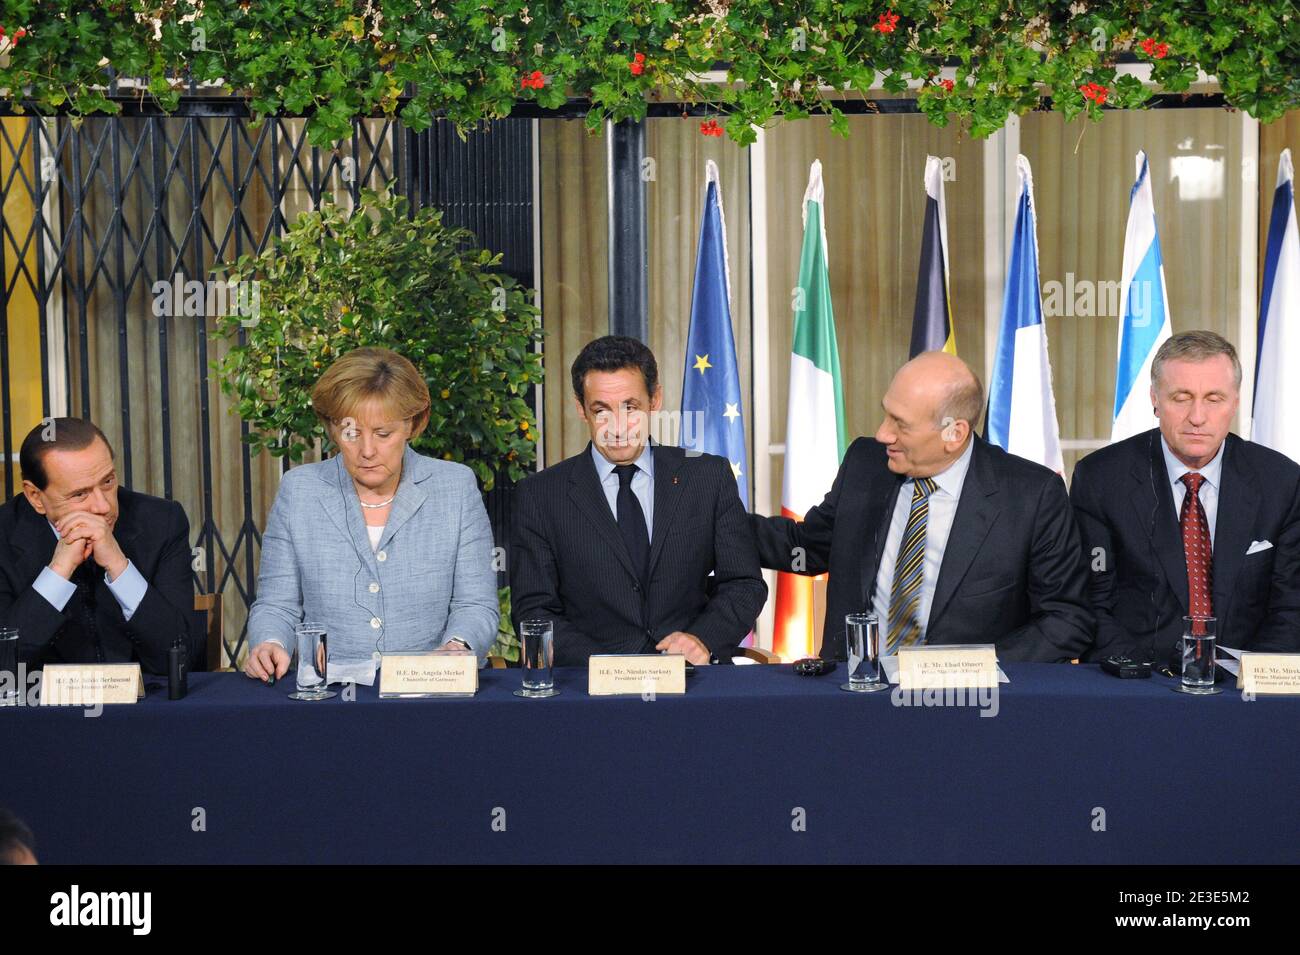 (R-L) Czech Prime Minister Mirek Topolanek, Israeli Prime Minister Ehud Olmert, French President Nicolas Sarkozy and German Chancellor Angela Merkel and Italian Prime Minister Silvio Berlusconi seen during a joint press conference with other European leaders at the residence of Israeli Prime Minister Ehud Olmert in Jerusalem, Israel on January 18, 2009. Photo by Ammar Abd Rabbo/ABACAPRESS.COM Stock Photo